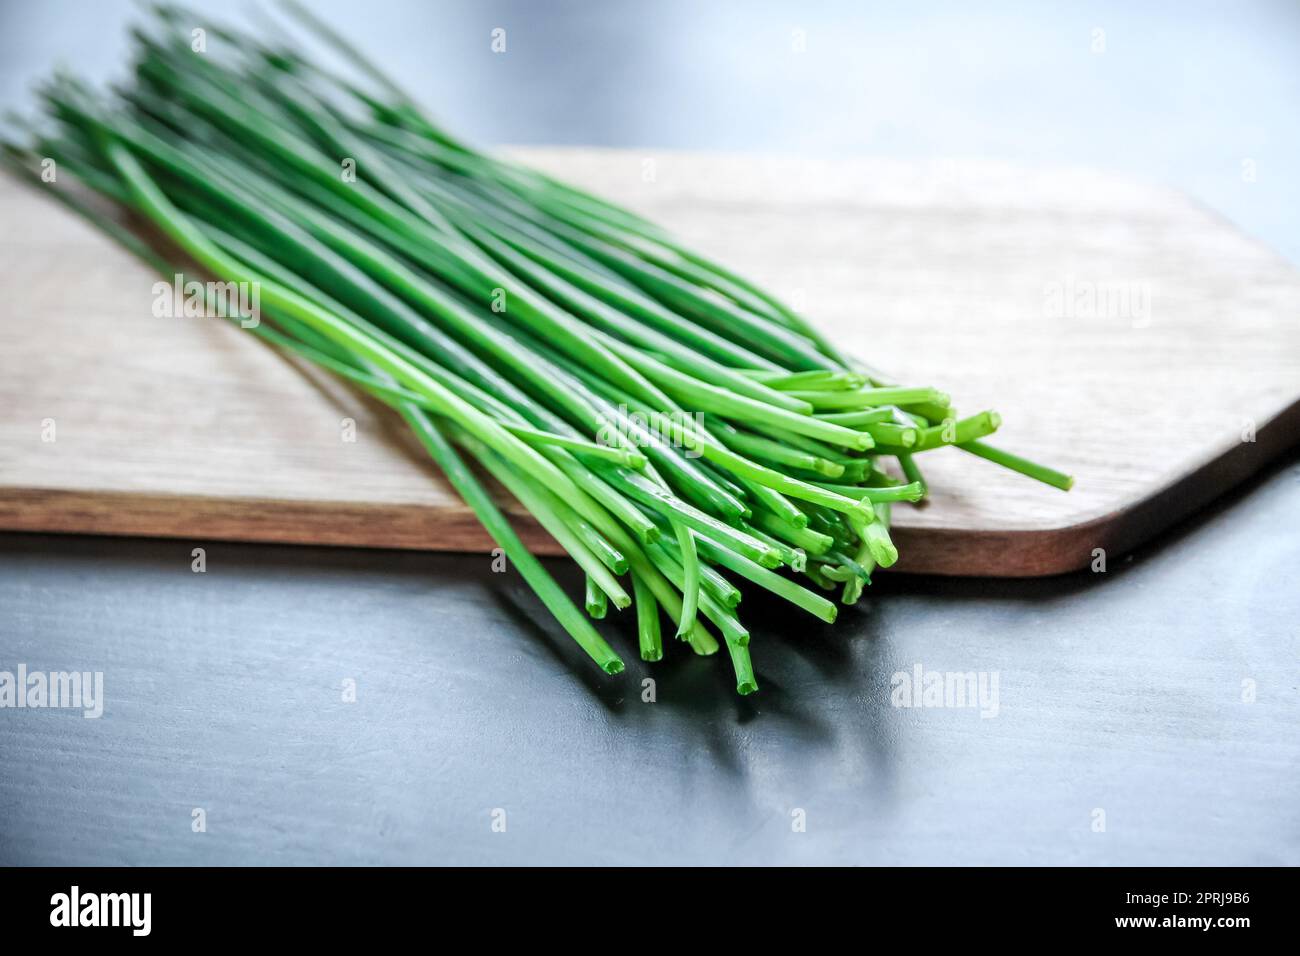 Bunch of chives on a wooden cutting board Stock Photo